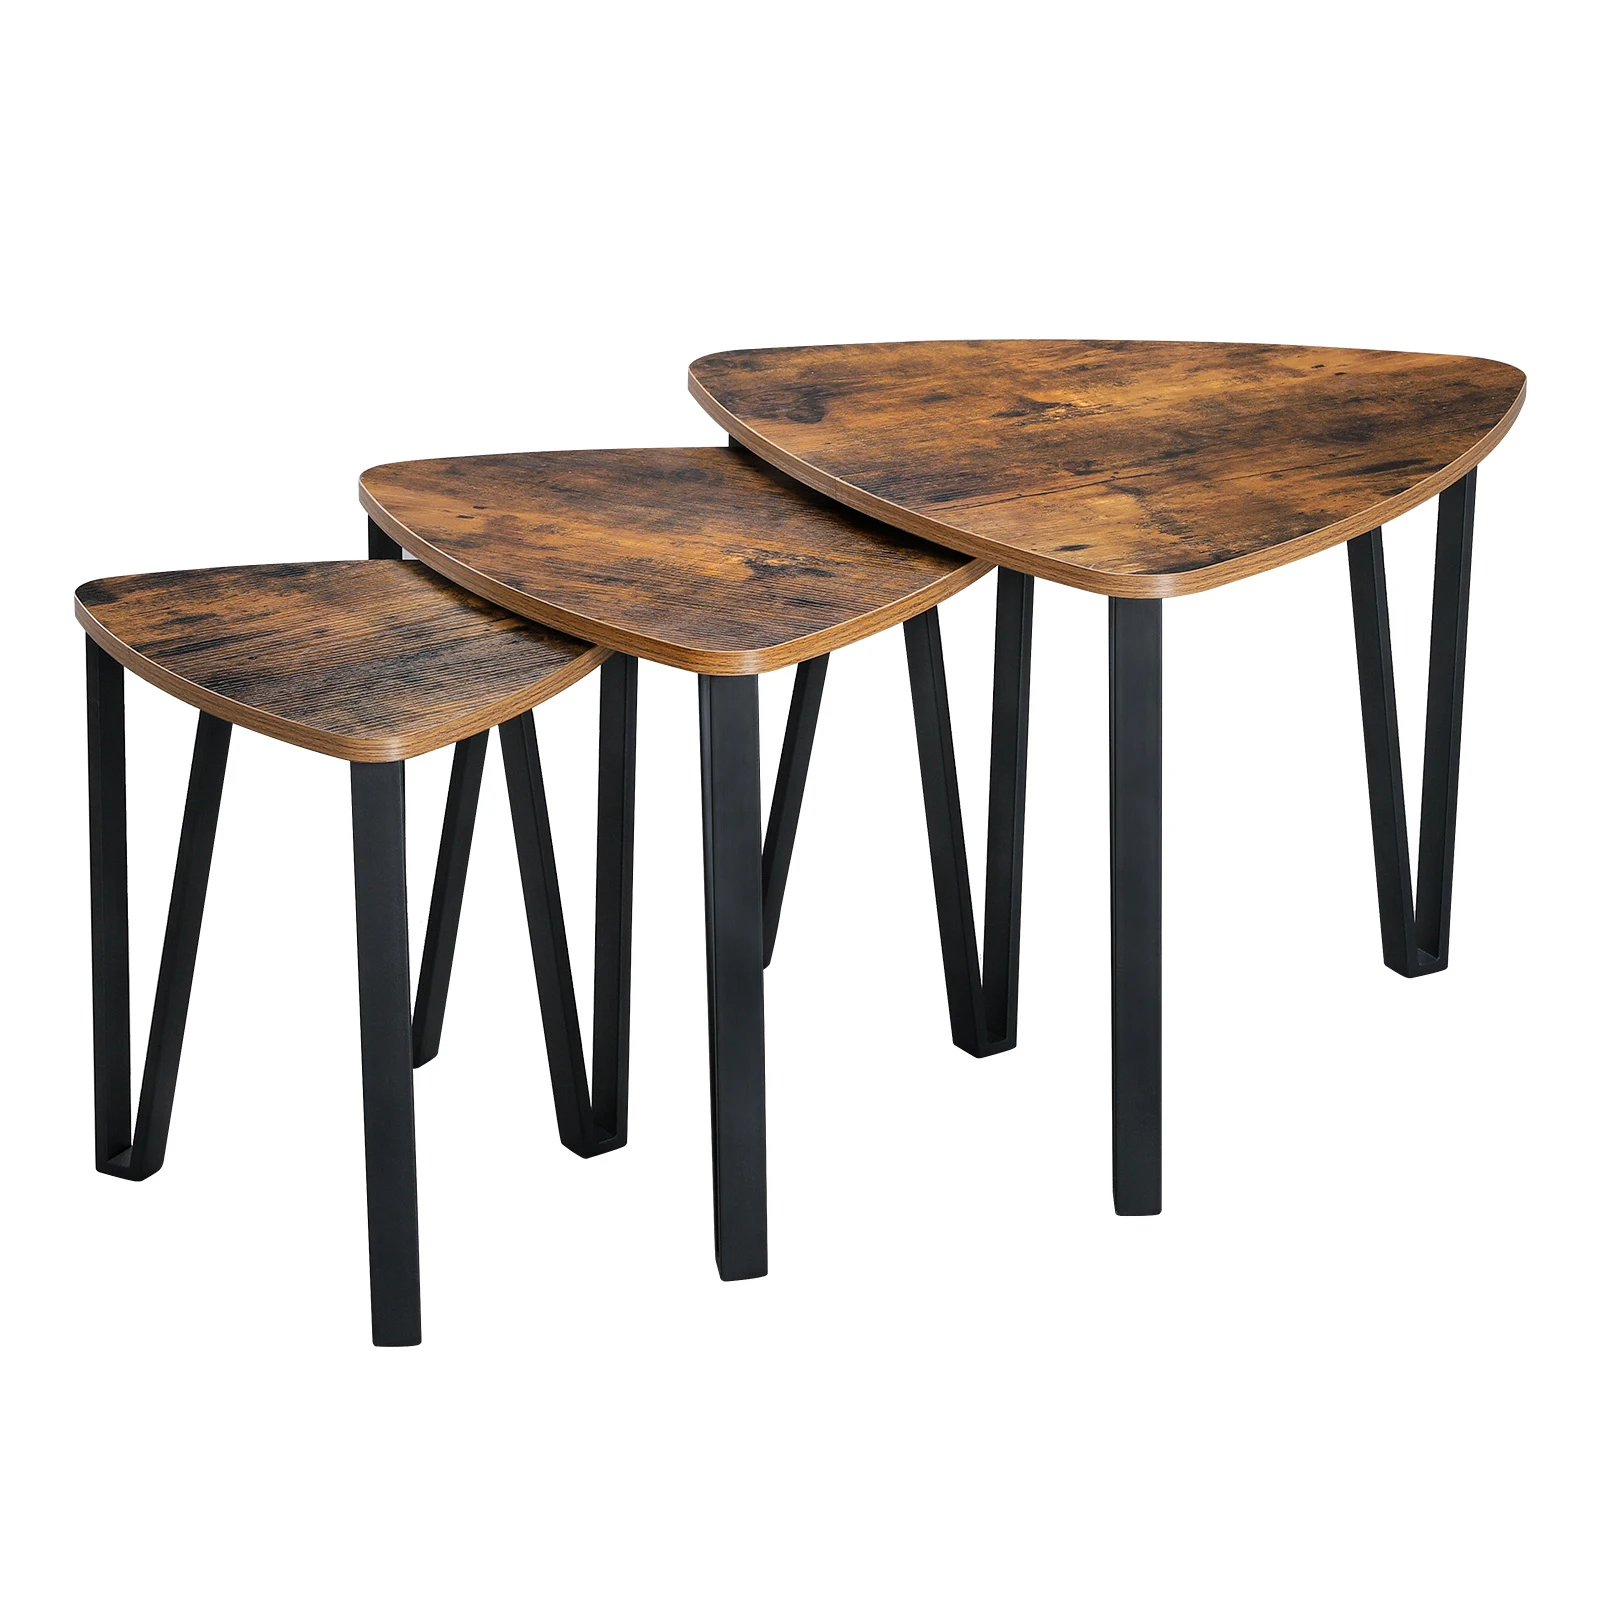 3 Tables Retro Style Wooden Coffee Table nest of table Nesting Set Rustic Solid 